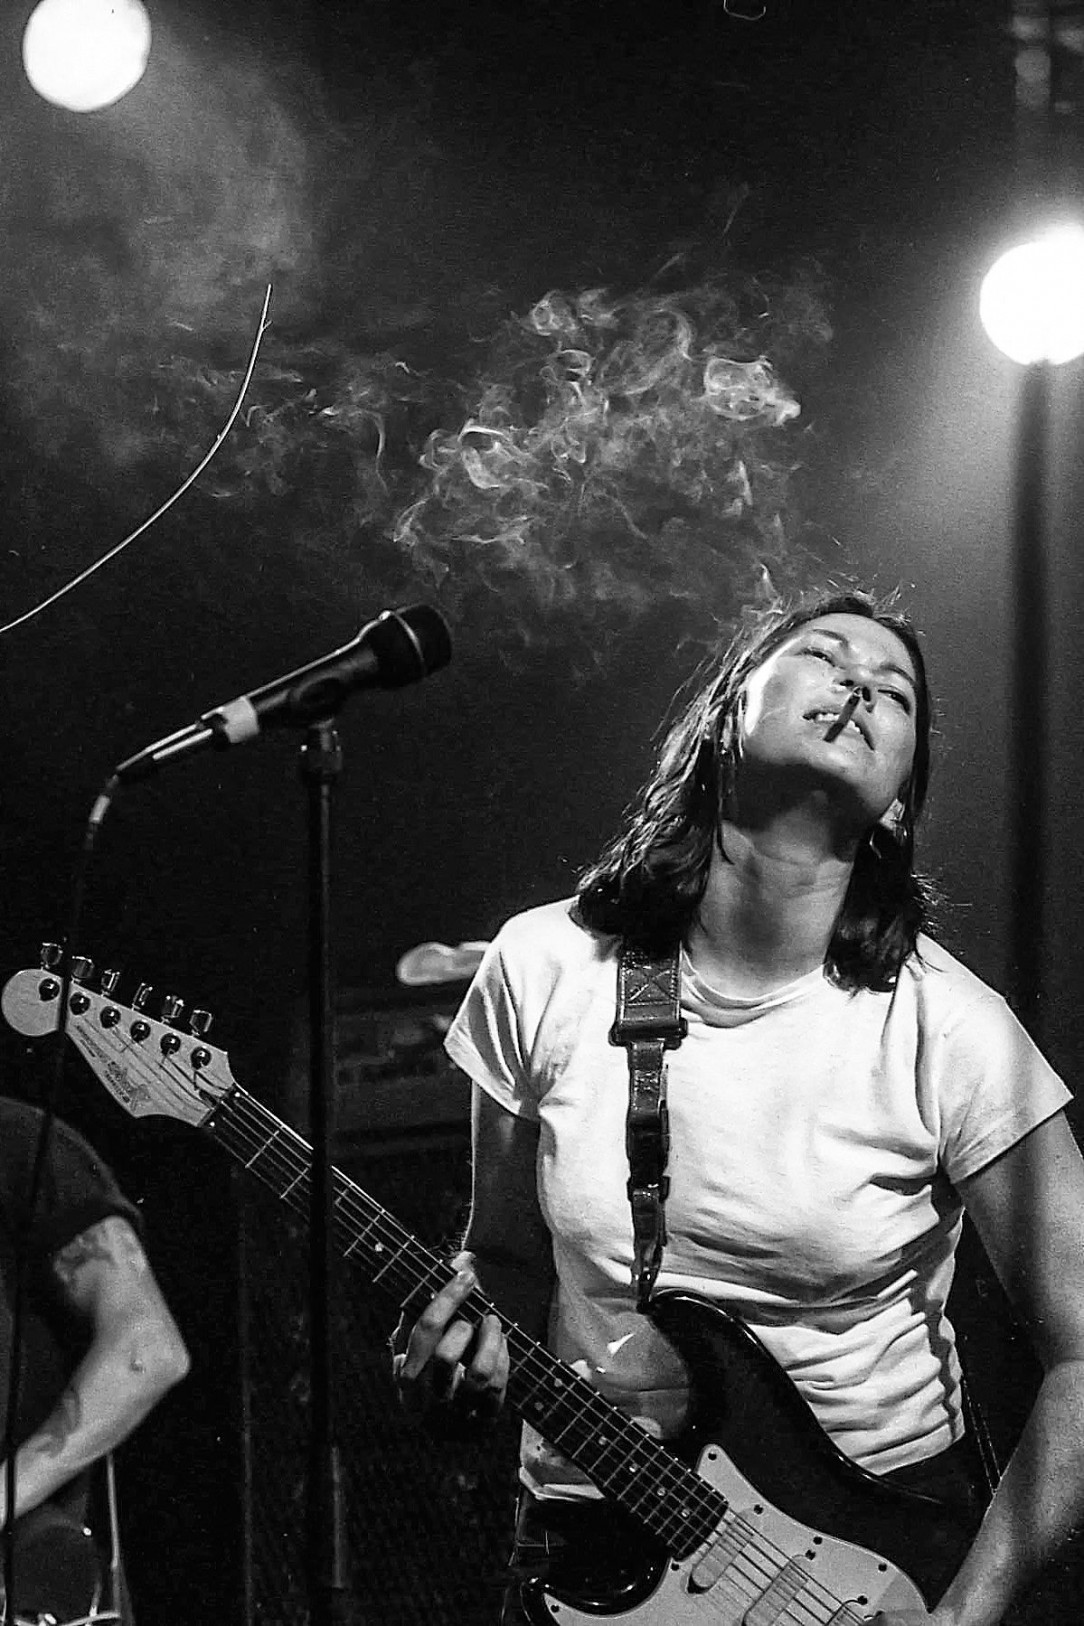 Kim Deal, Playing Guitar In Her Band The Breeders. 1993